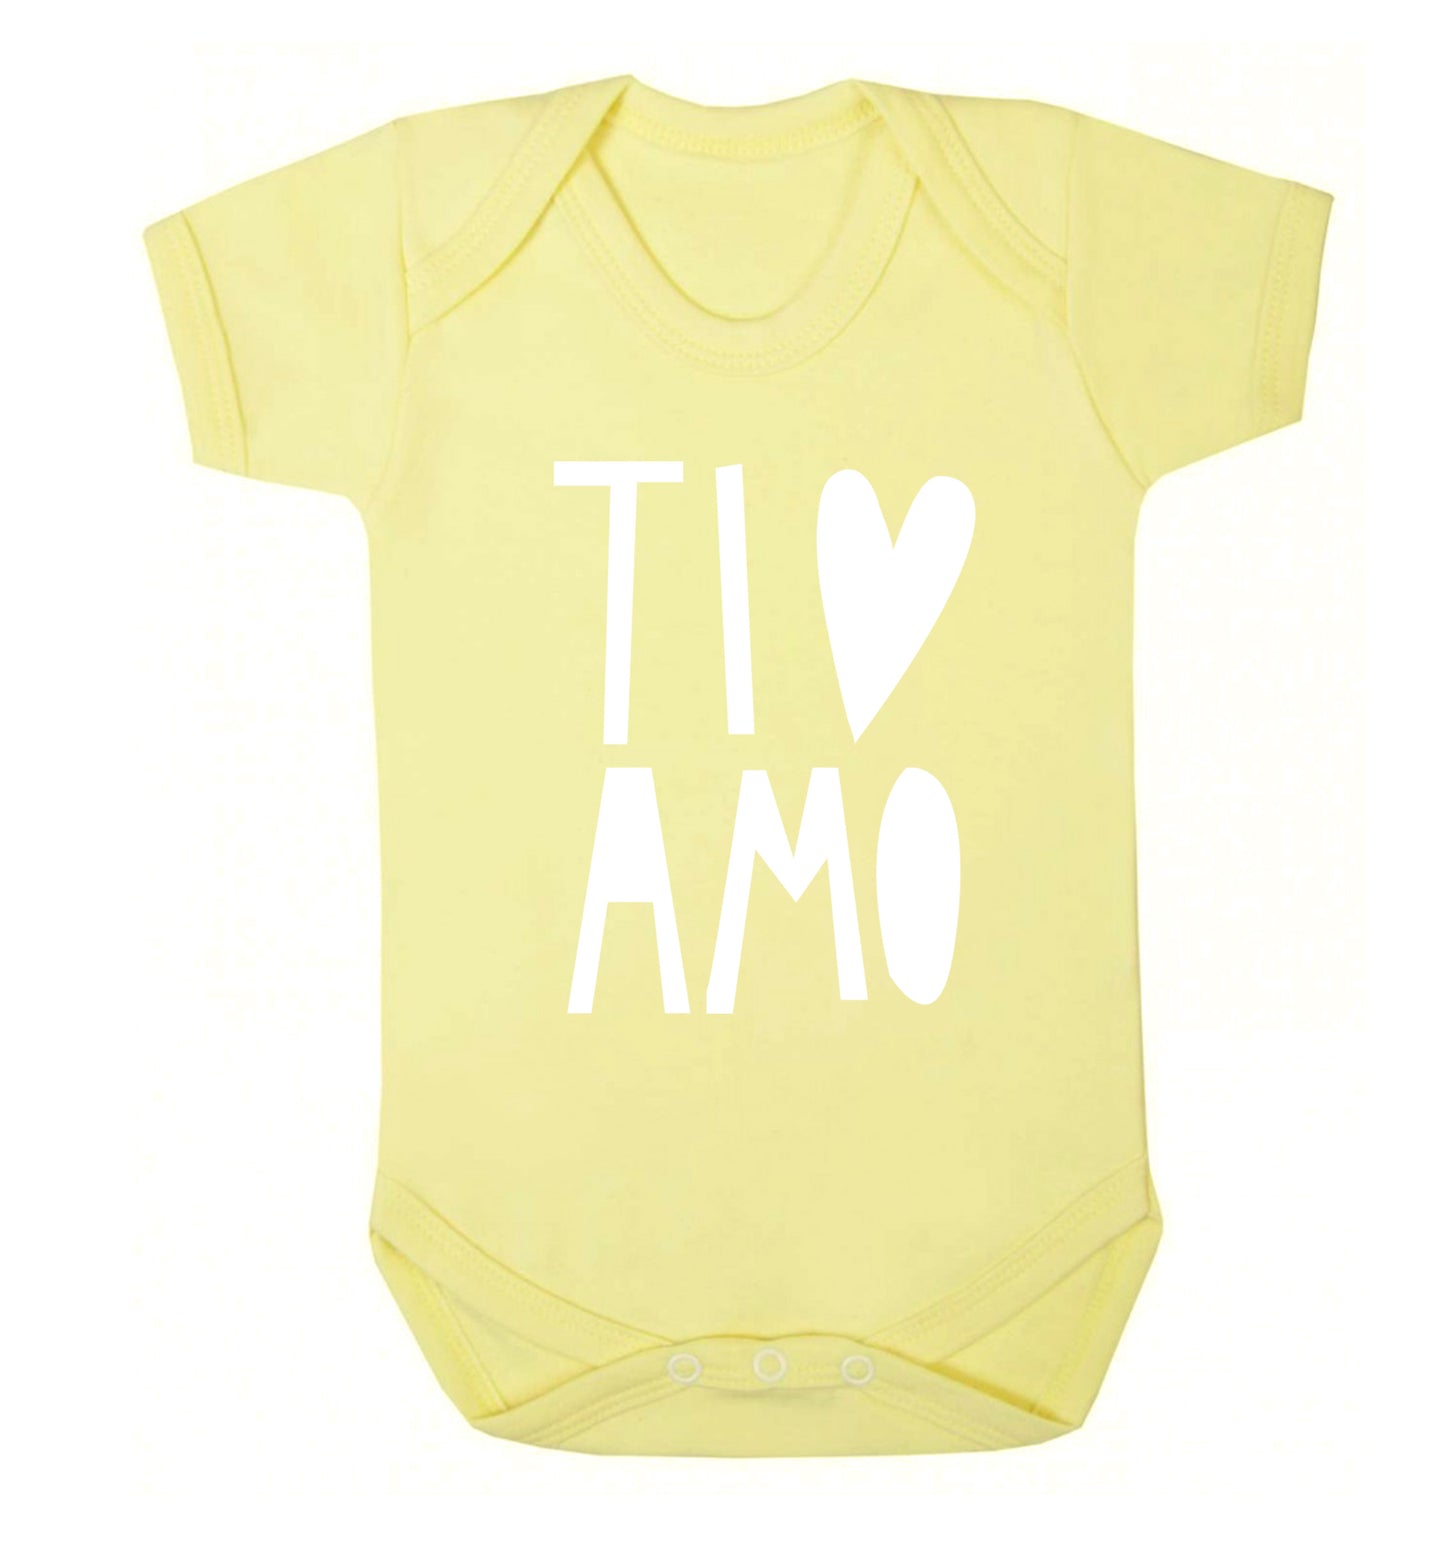 Ti amo - I love you Baby Vest pale yellow 18-24 months